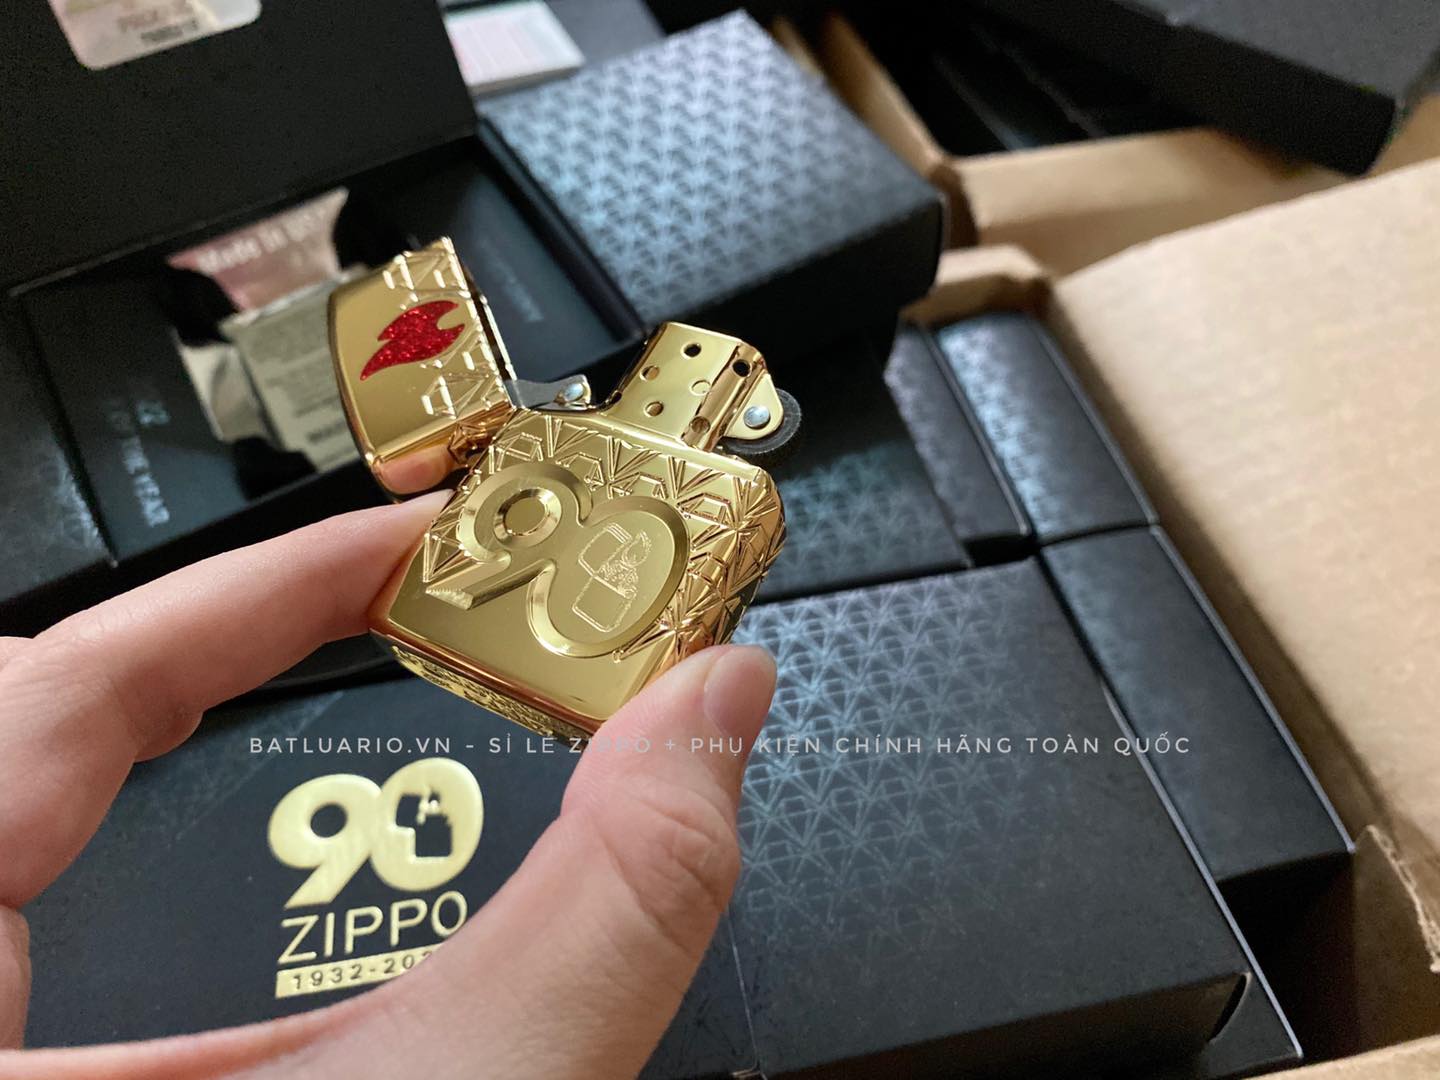 Zippo 49866 – Zippo 90th Anniversary Limited Edition - Zippo 2022 Collectible Of The Year Asia - Gold Plated - Zippo Coty 2022 Asia 86